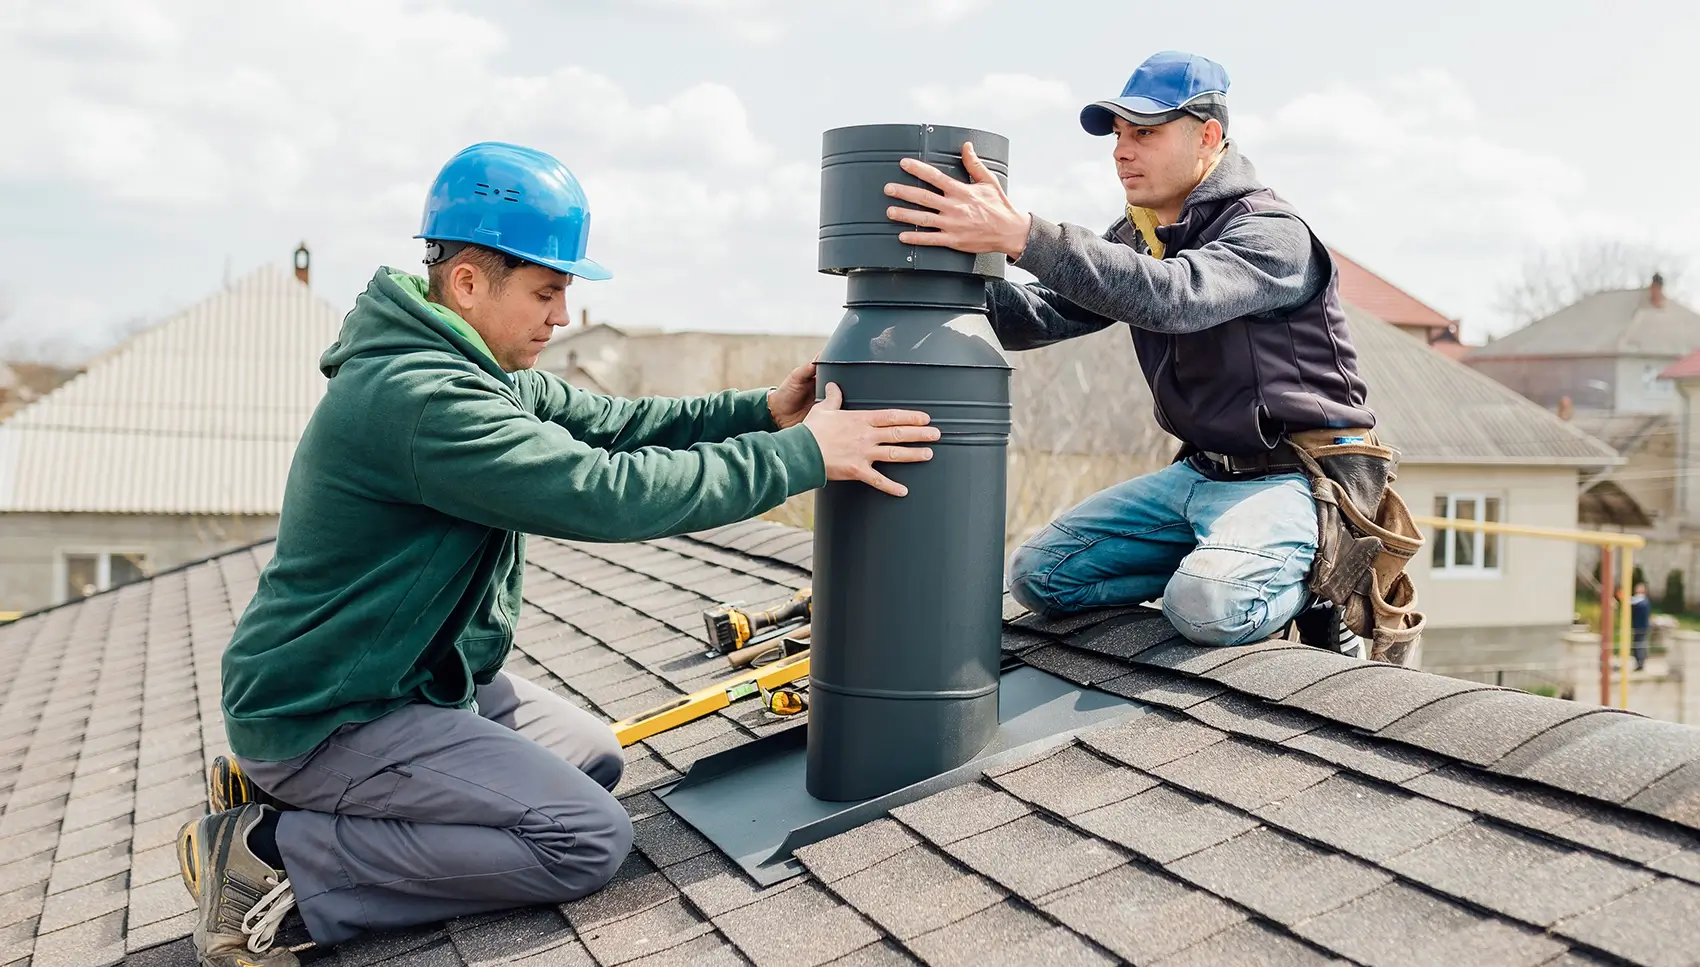 A professional chimney inspector examining a residential chimney.